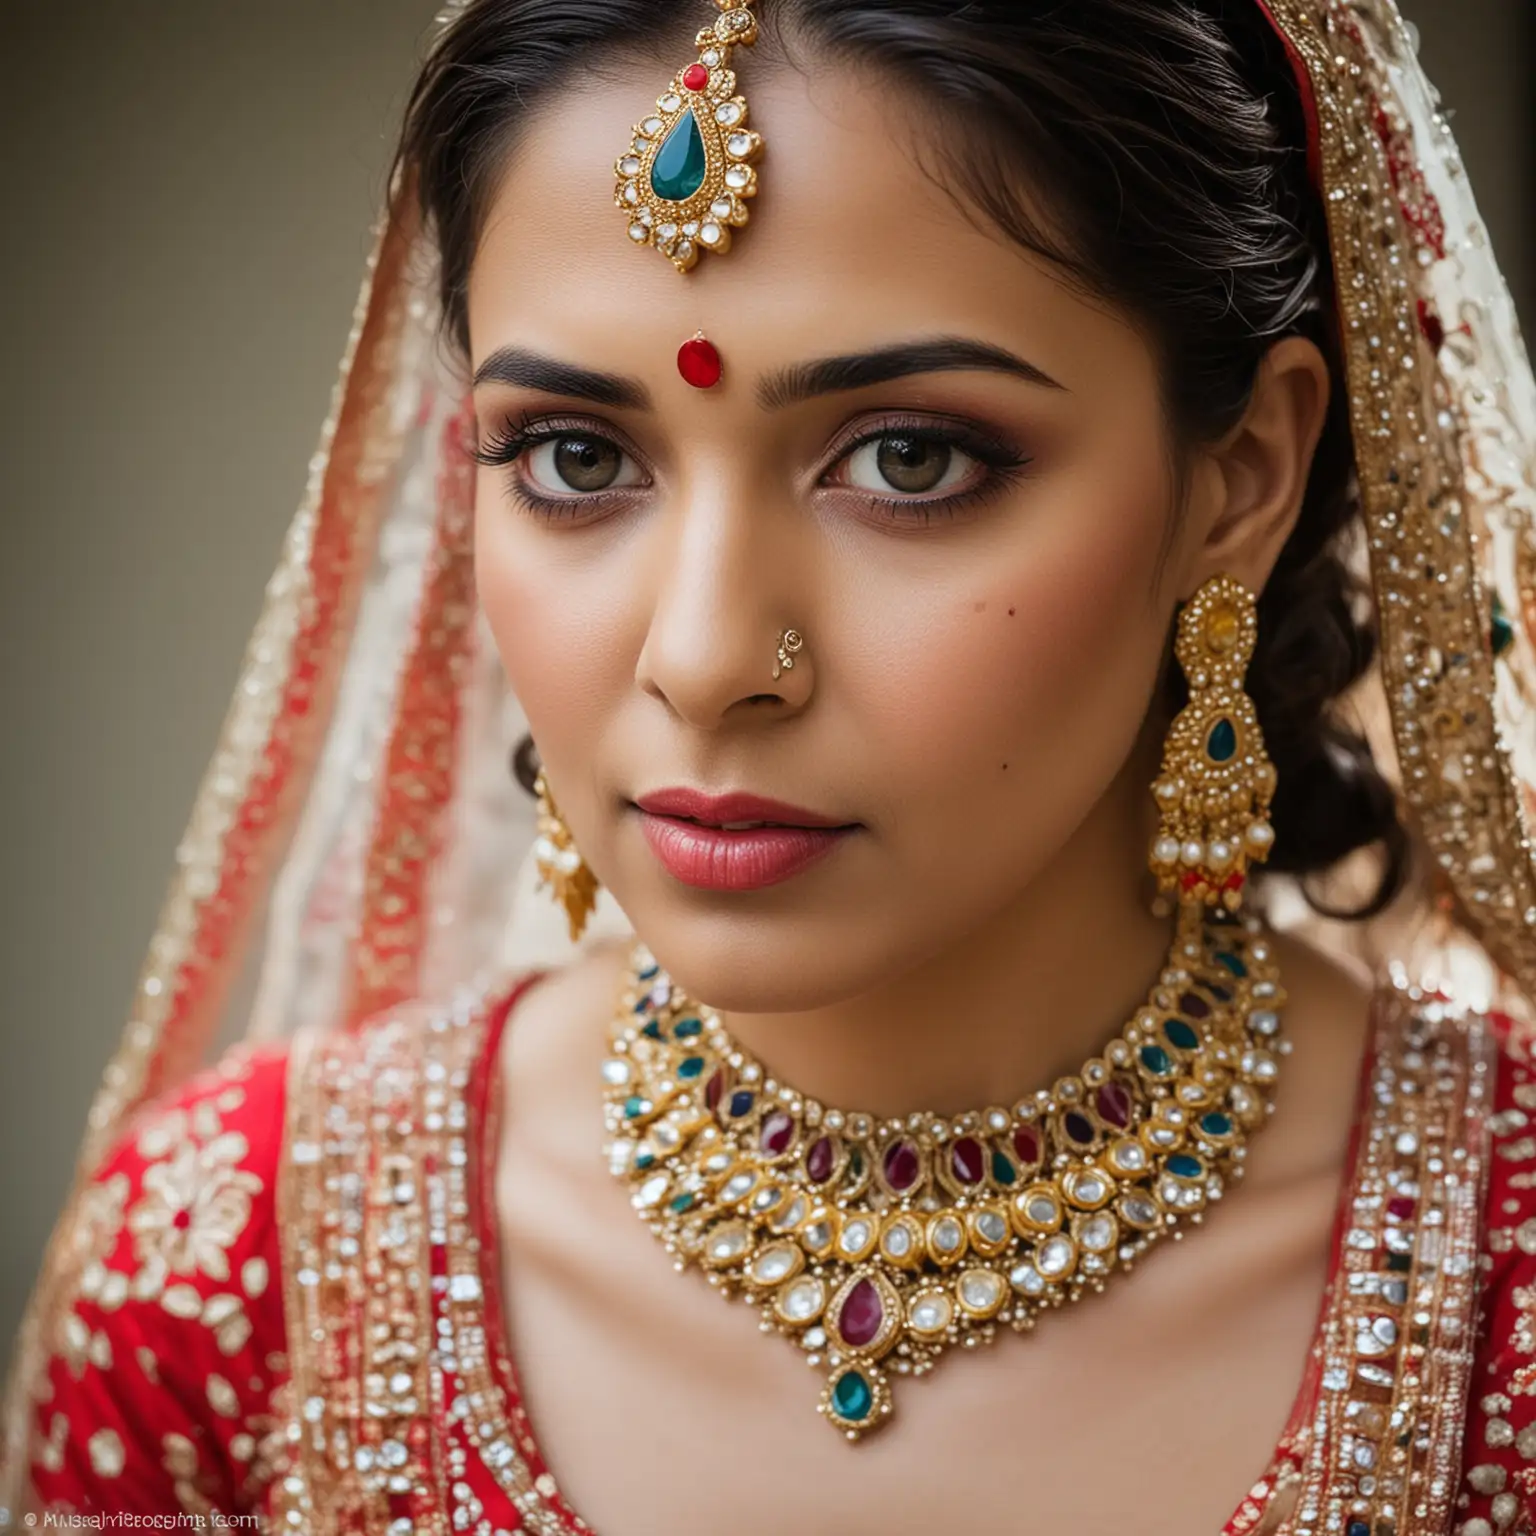 Colorful Polki Jewelry Adorning Indian Bride